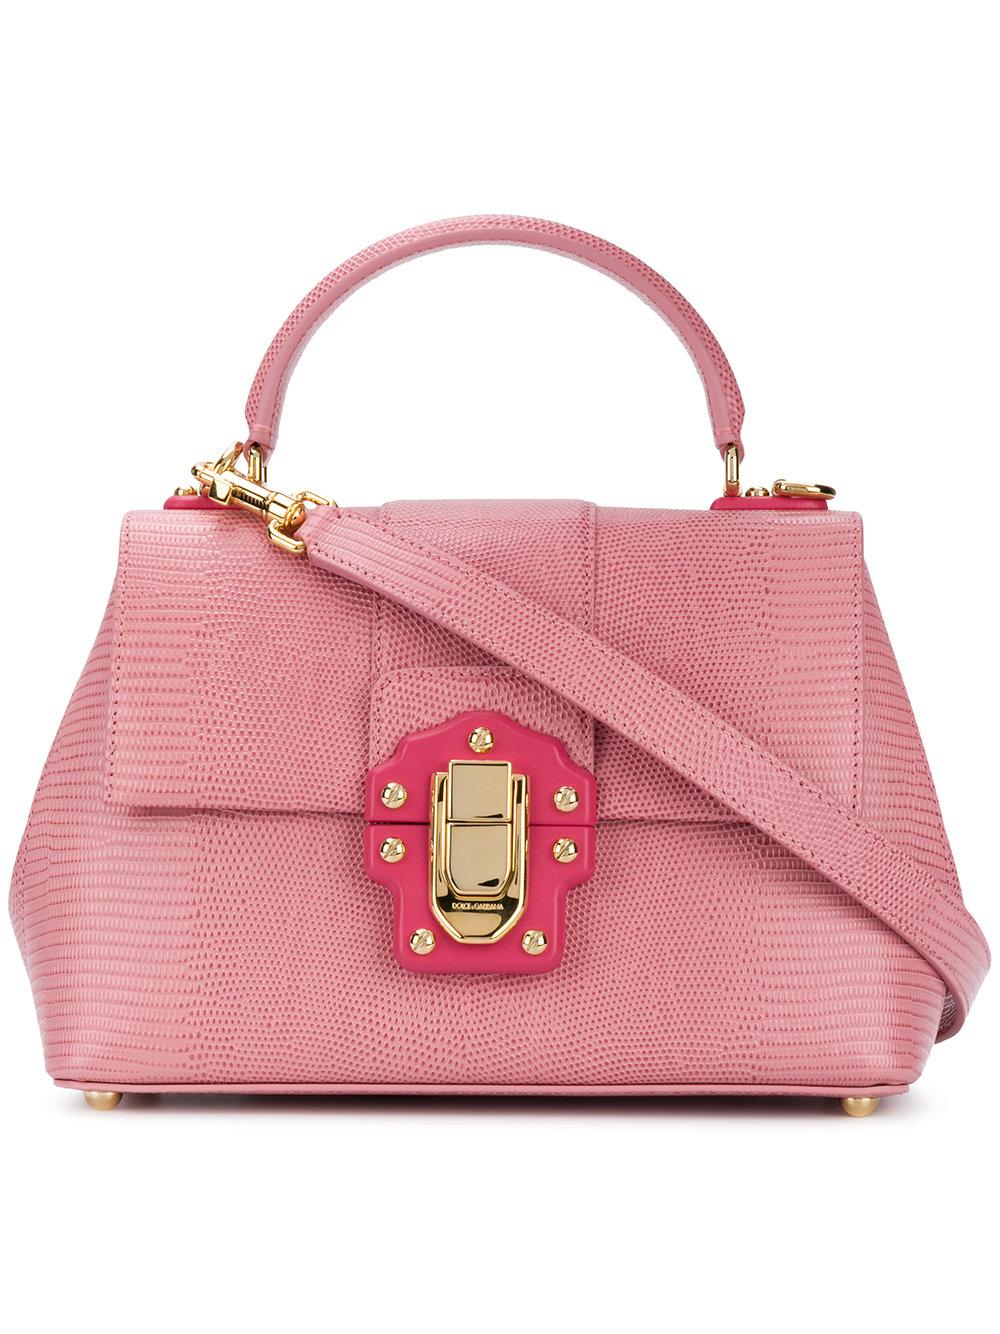 Dolce & Gabbana Lucia Tote Bag In Pink | ModeSens